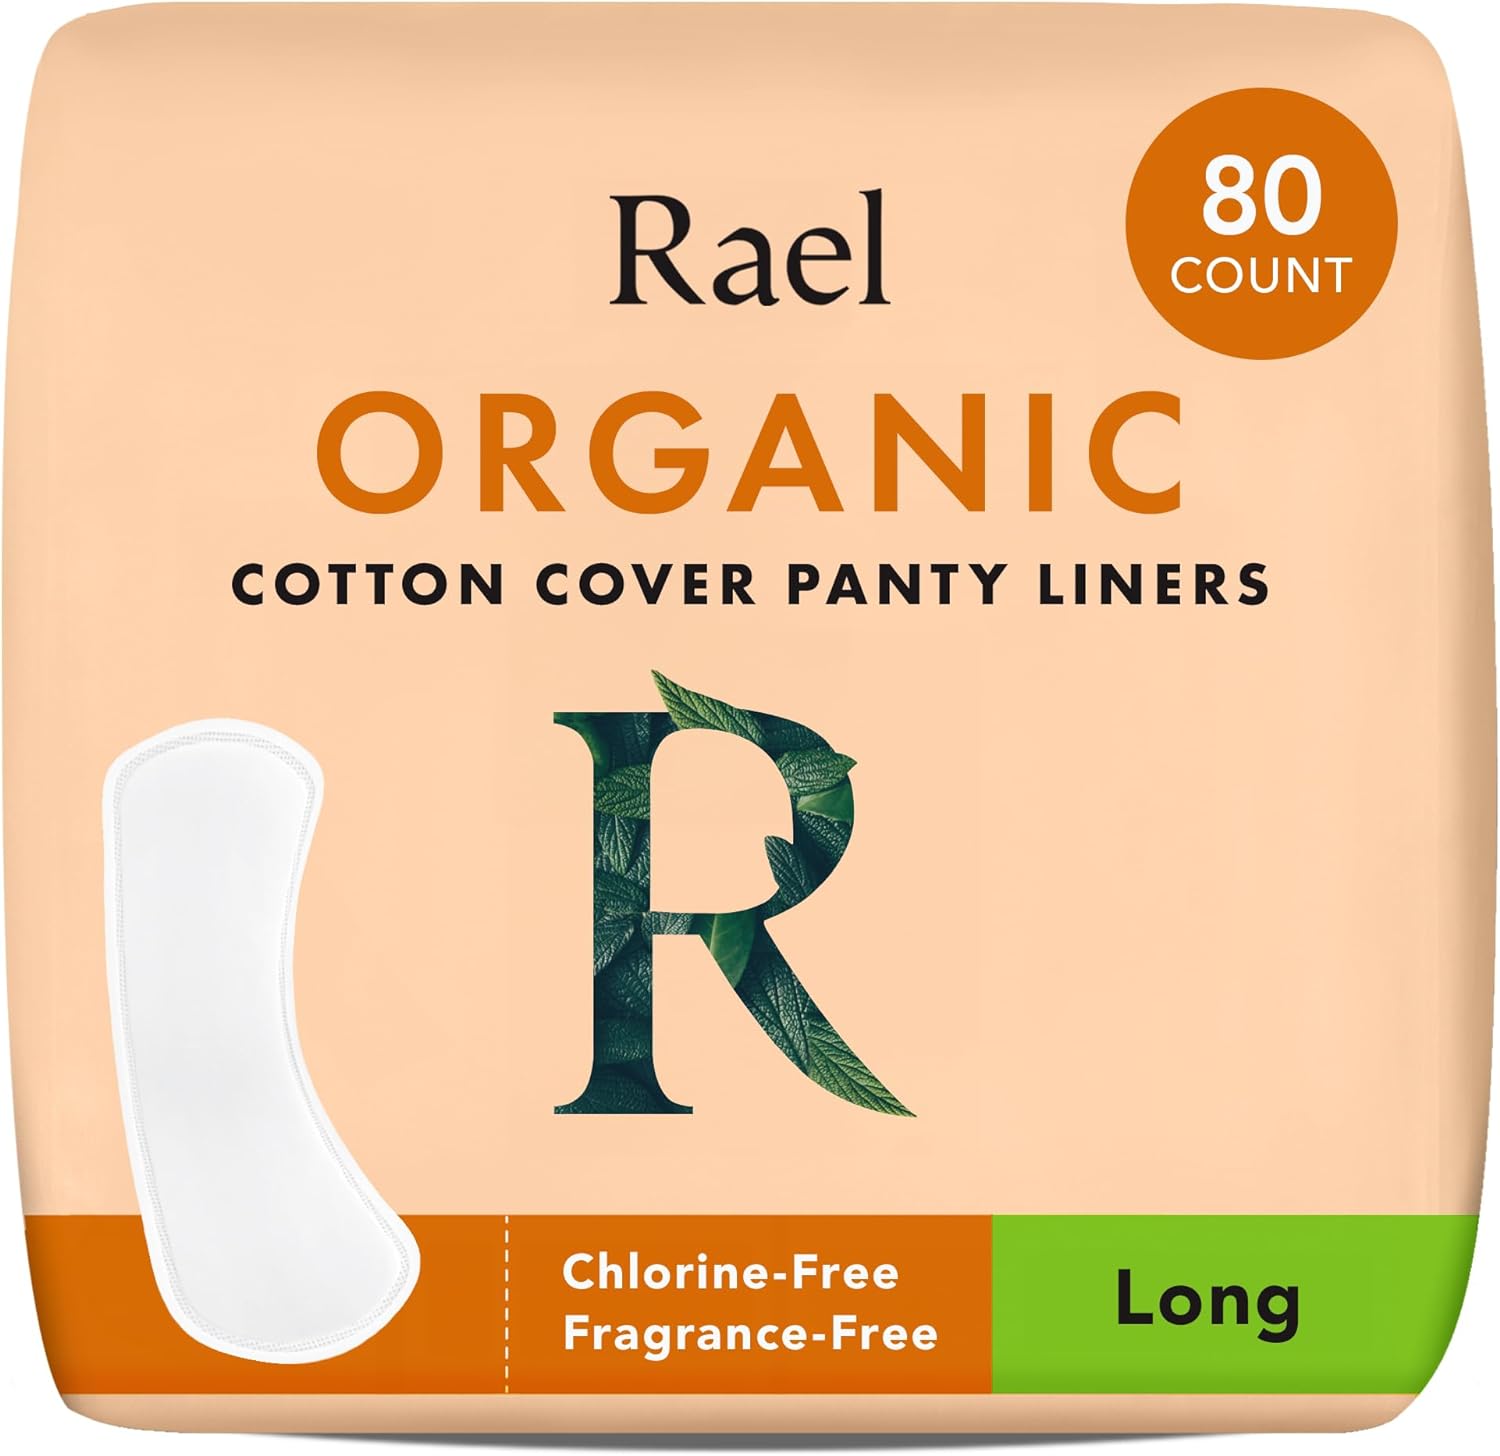 Rael Panty Liners for Women, Organic Cotton Cover - Long Pantiliners, Light Absorbency, Unscented, Chlorine Free (Long, 80 Count)